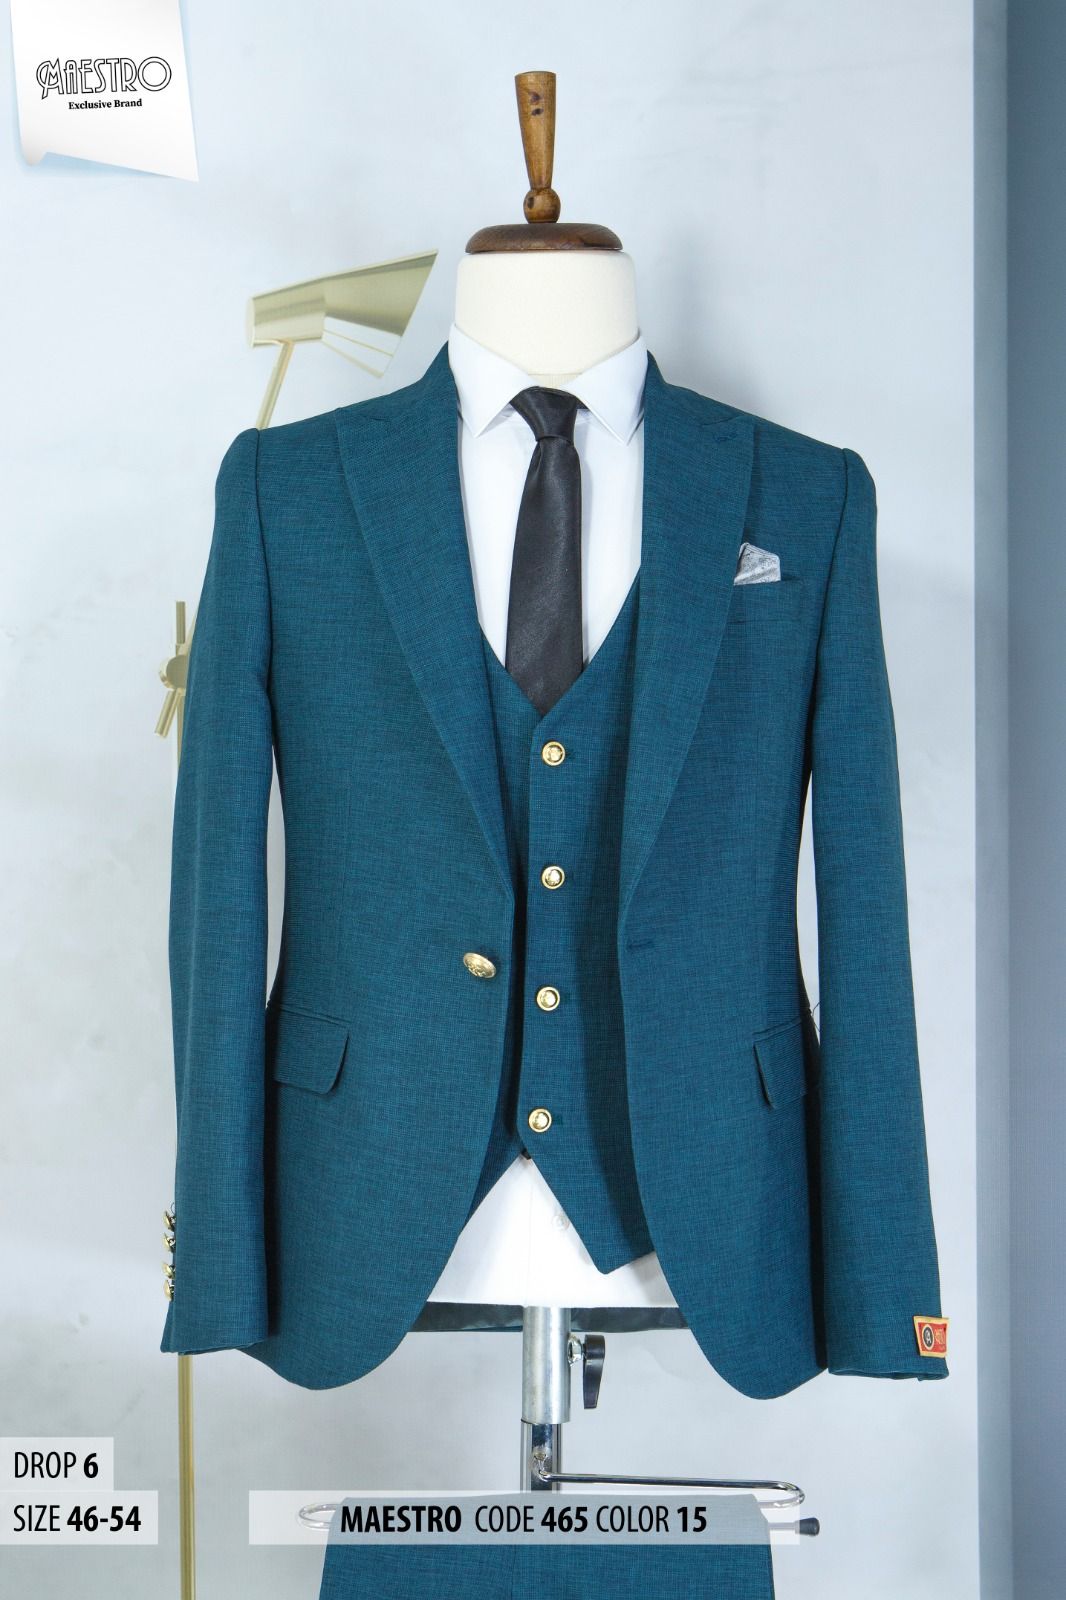 EXECUTIVE DARK GREEN CEREMONIAL SUIT WITH NAVY BLUE BUTTON [SWNL]